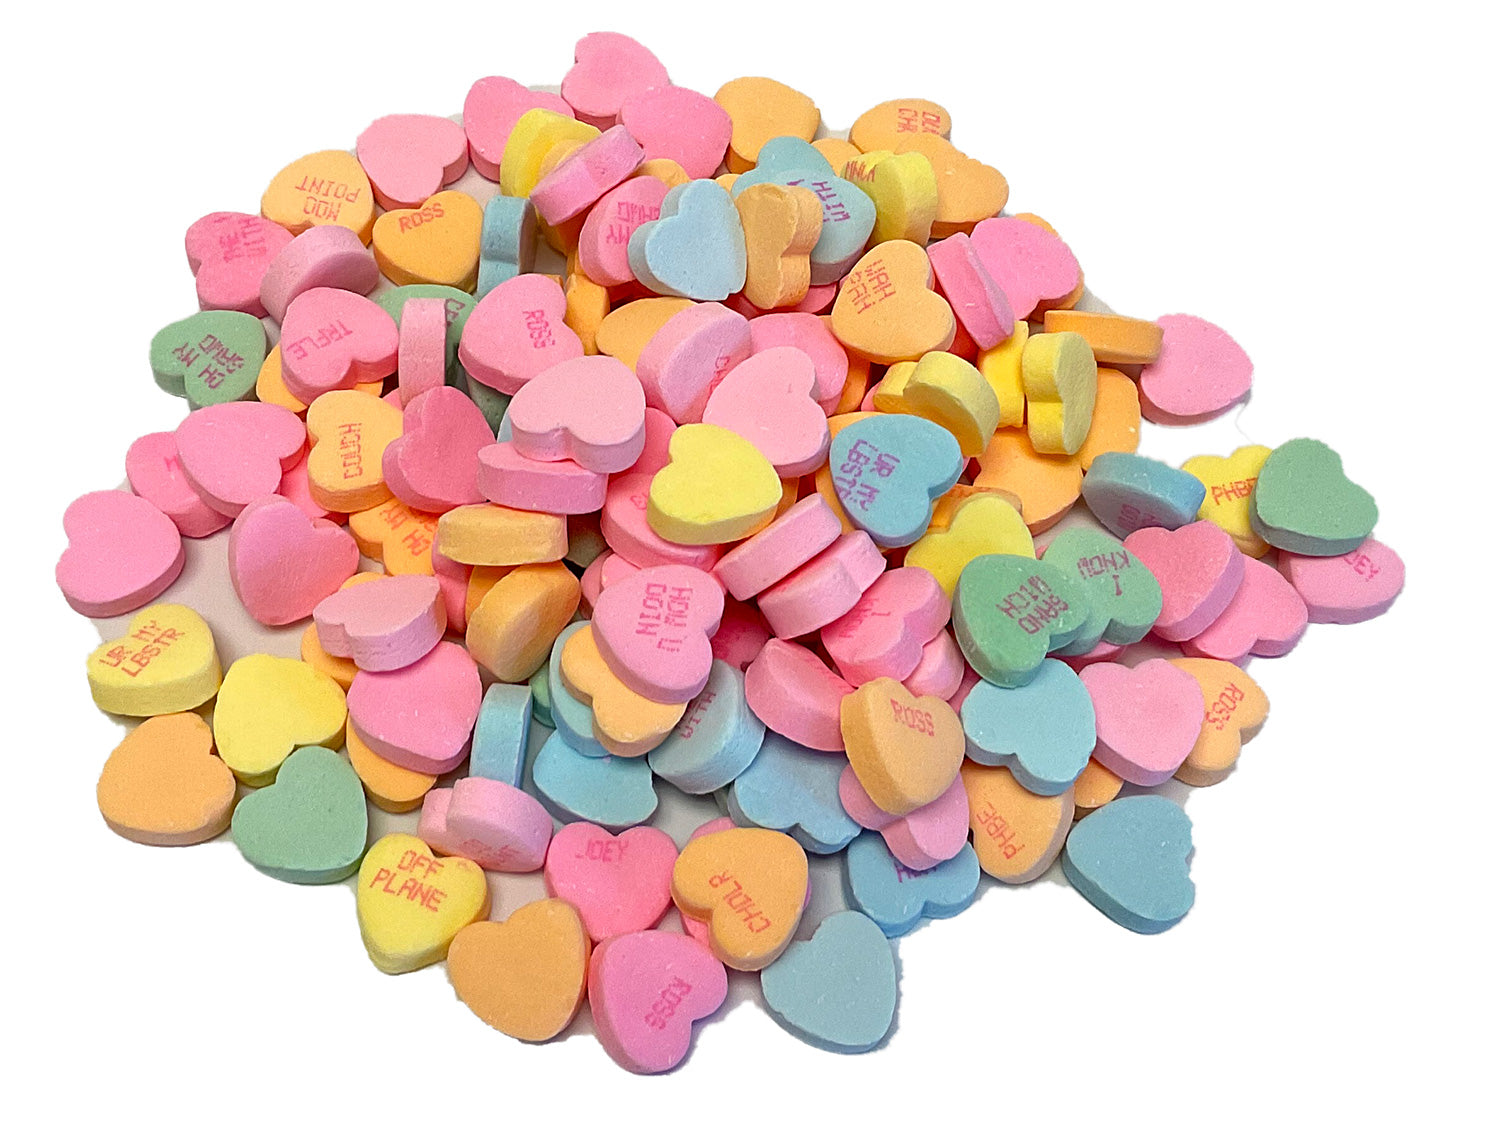 Brach's Iconic Conversation Hearts Get 'Friends' Makeover - Parade